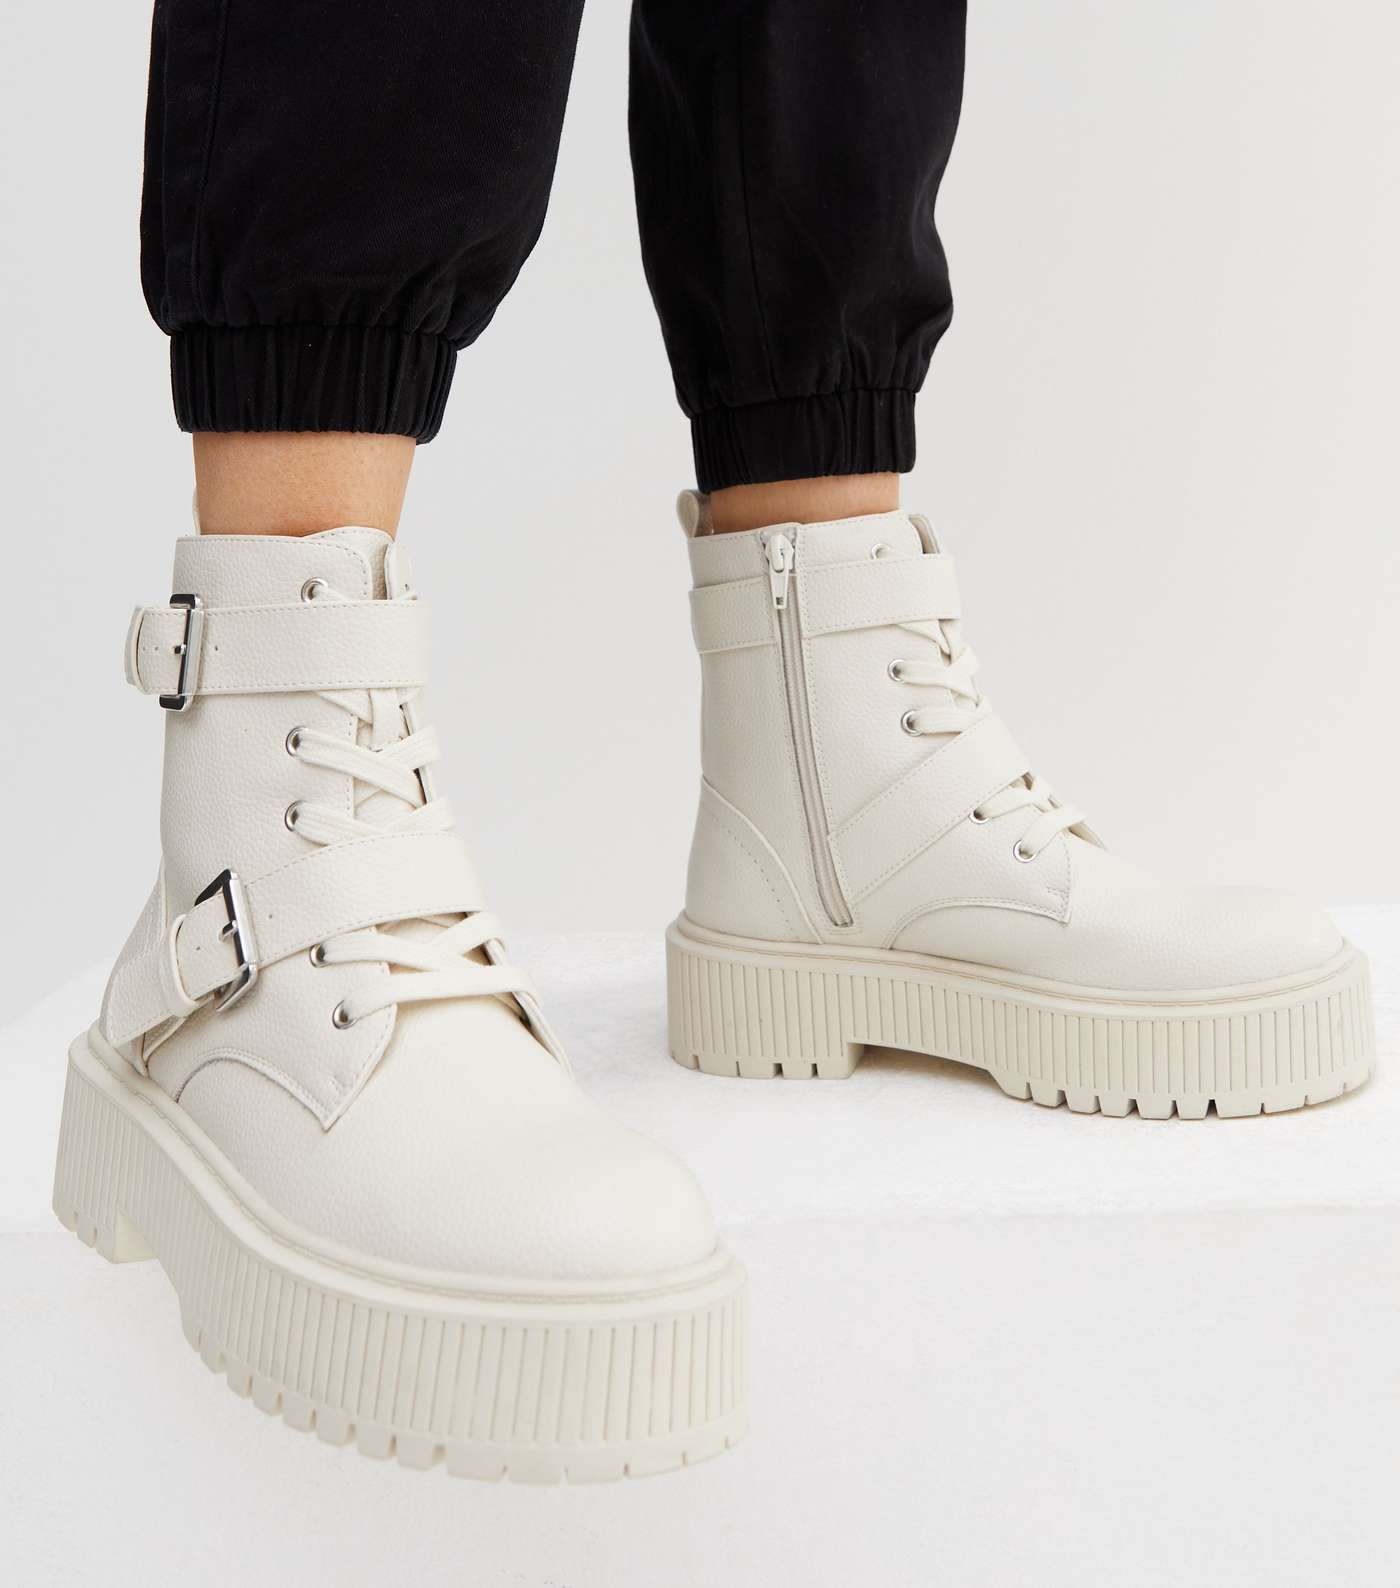 Off White Buckle Lace Up Chunky Flatform Boots Image 2